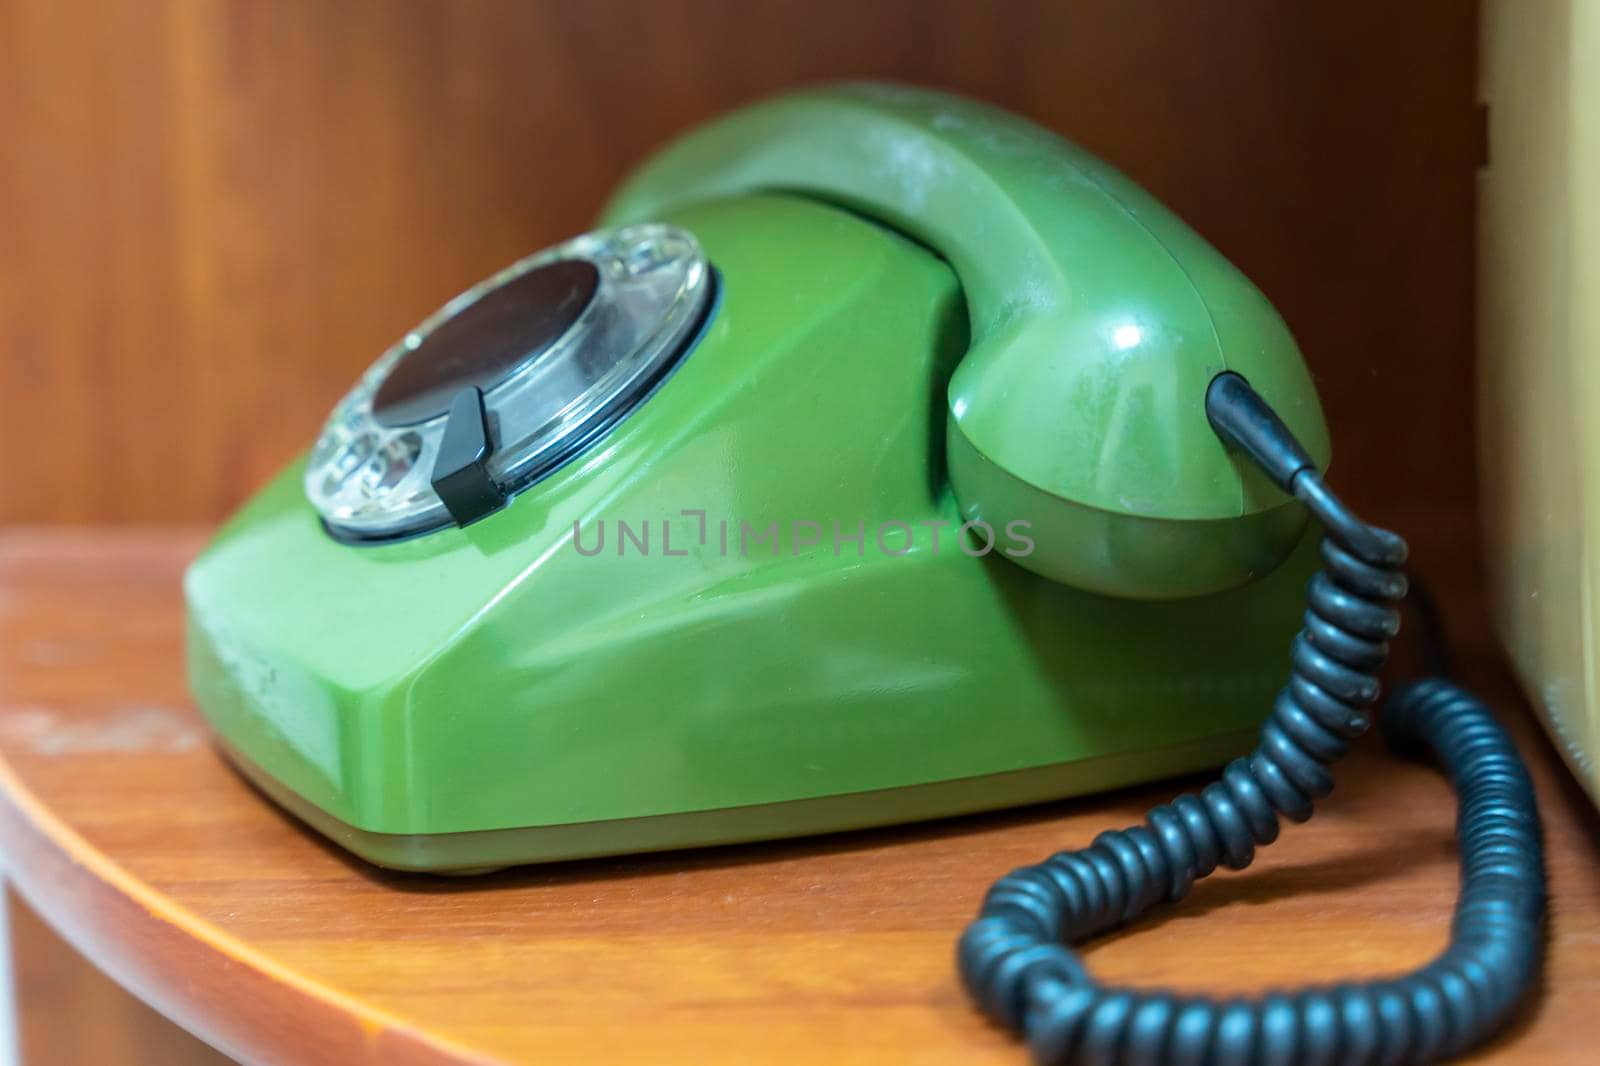 green vintage phone with a rotating dial dial. the phone on the shelf by audiznam2609